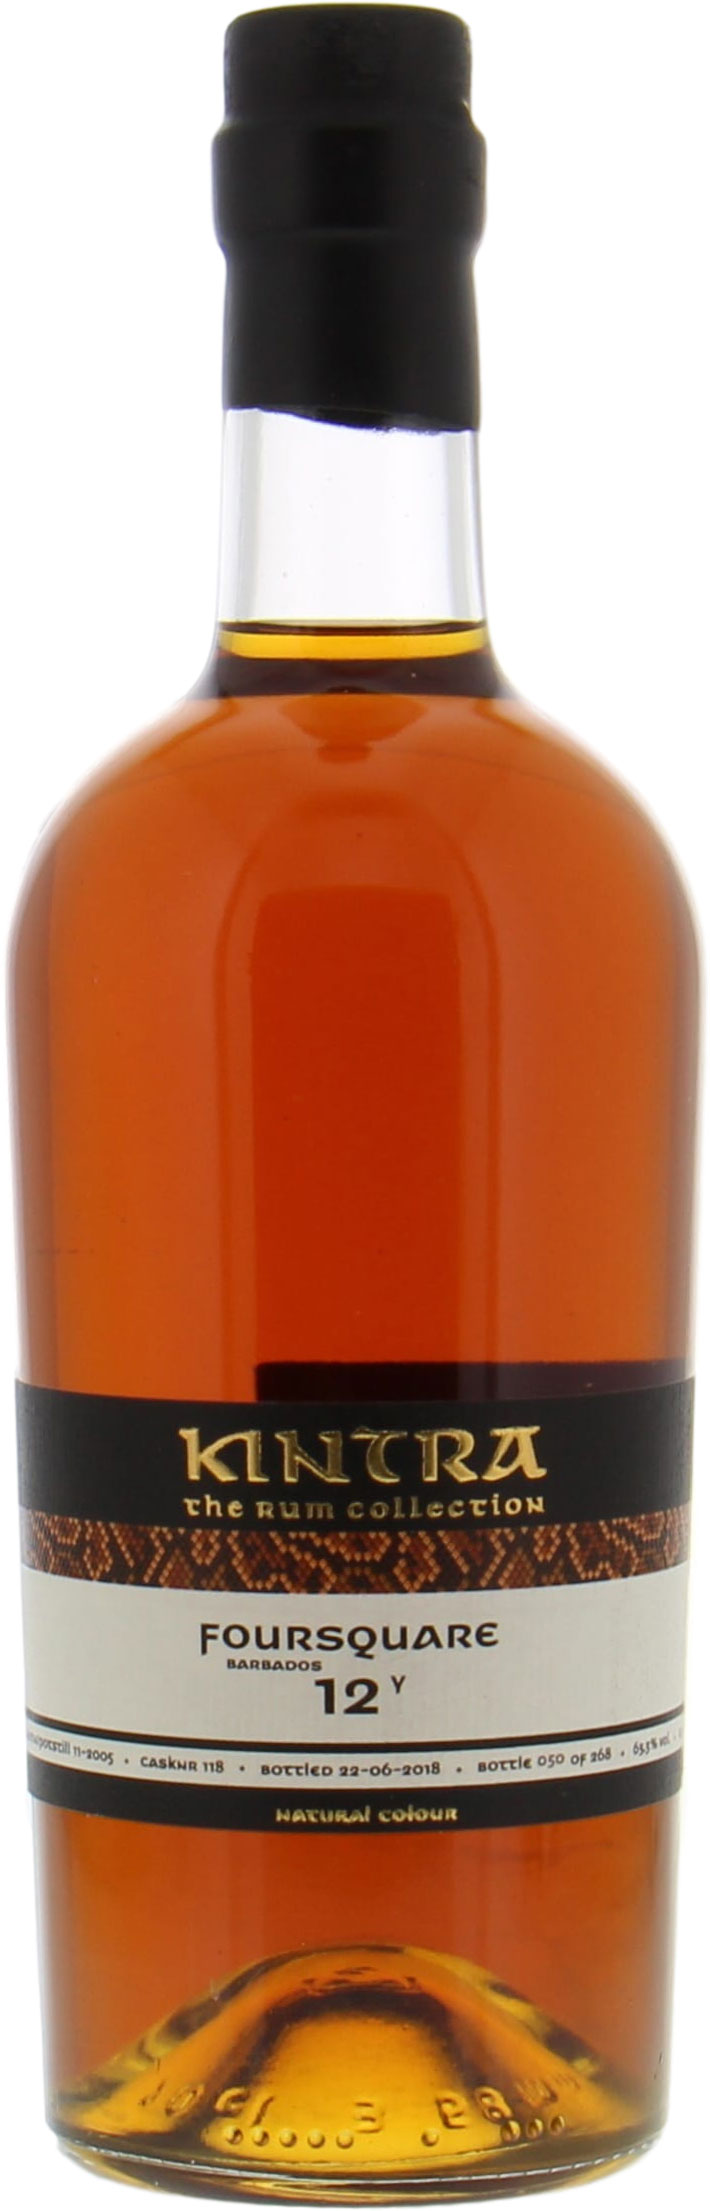 Foursquare - 12 Years Old KINTRA Cask 118 63.3% 2006